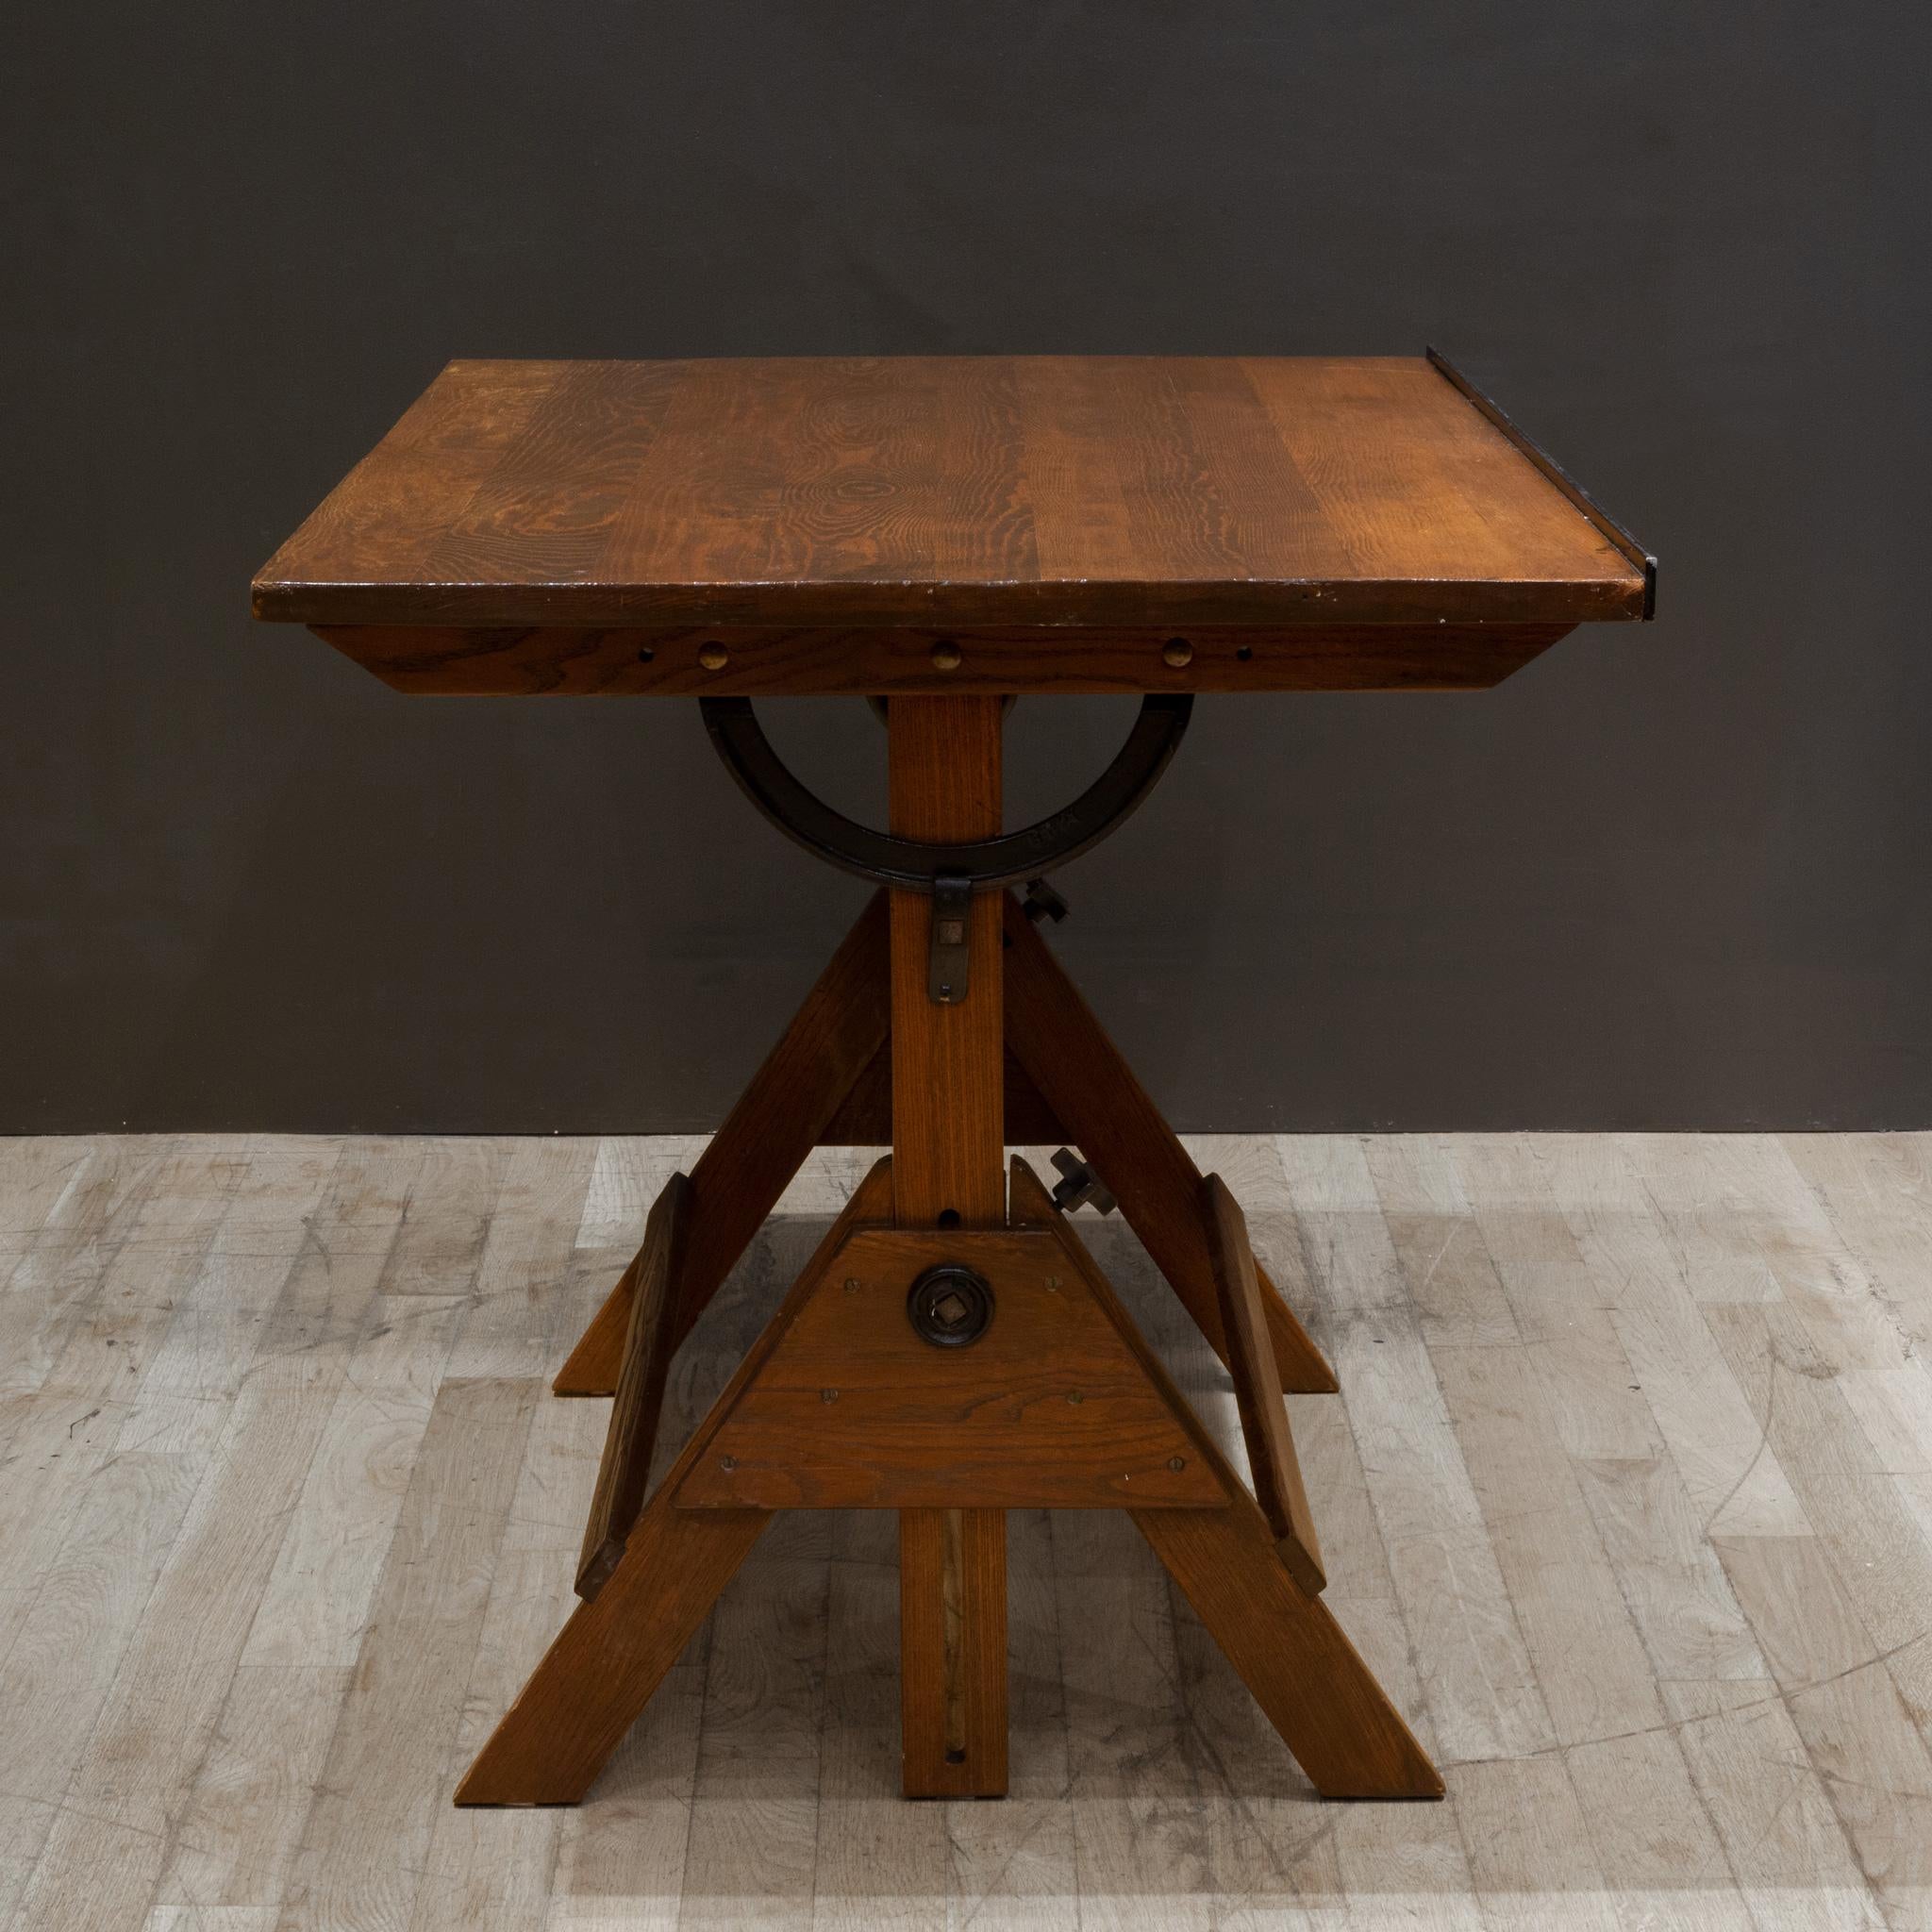 20th Century Vintage Anco Bilt Cast Iron and Wood Drafting Table/Desk c.1950 For Sale